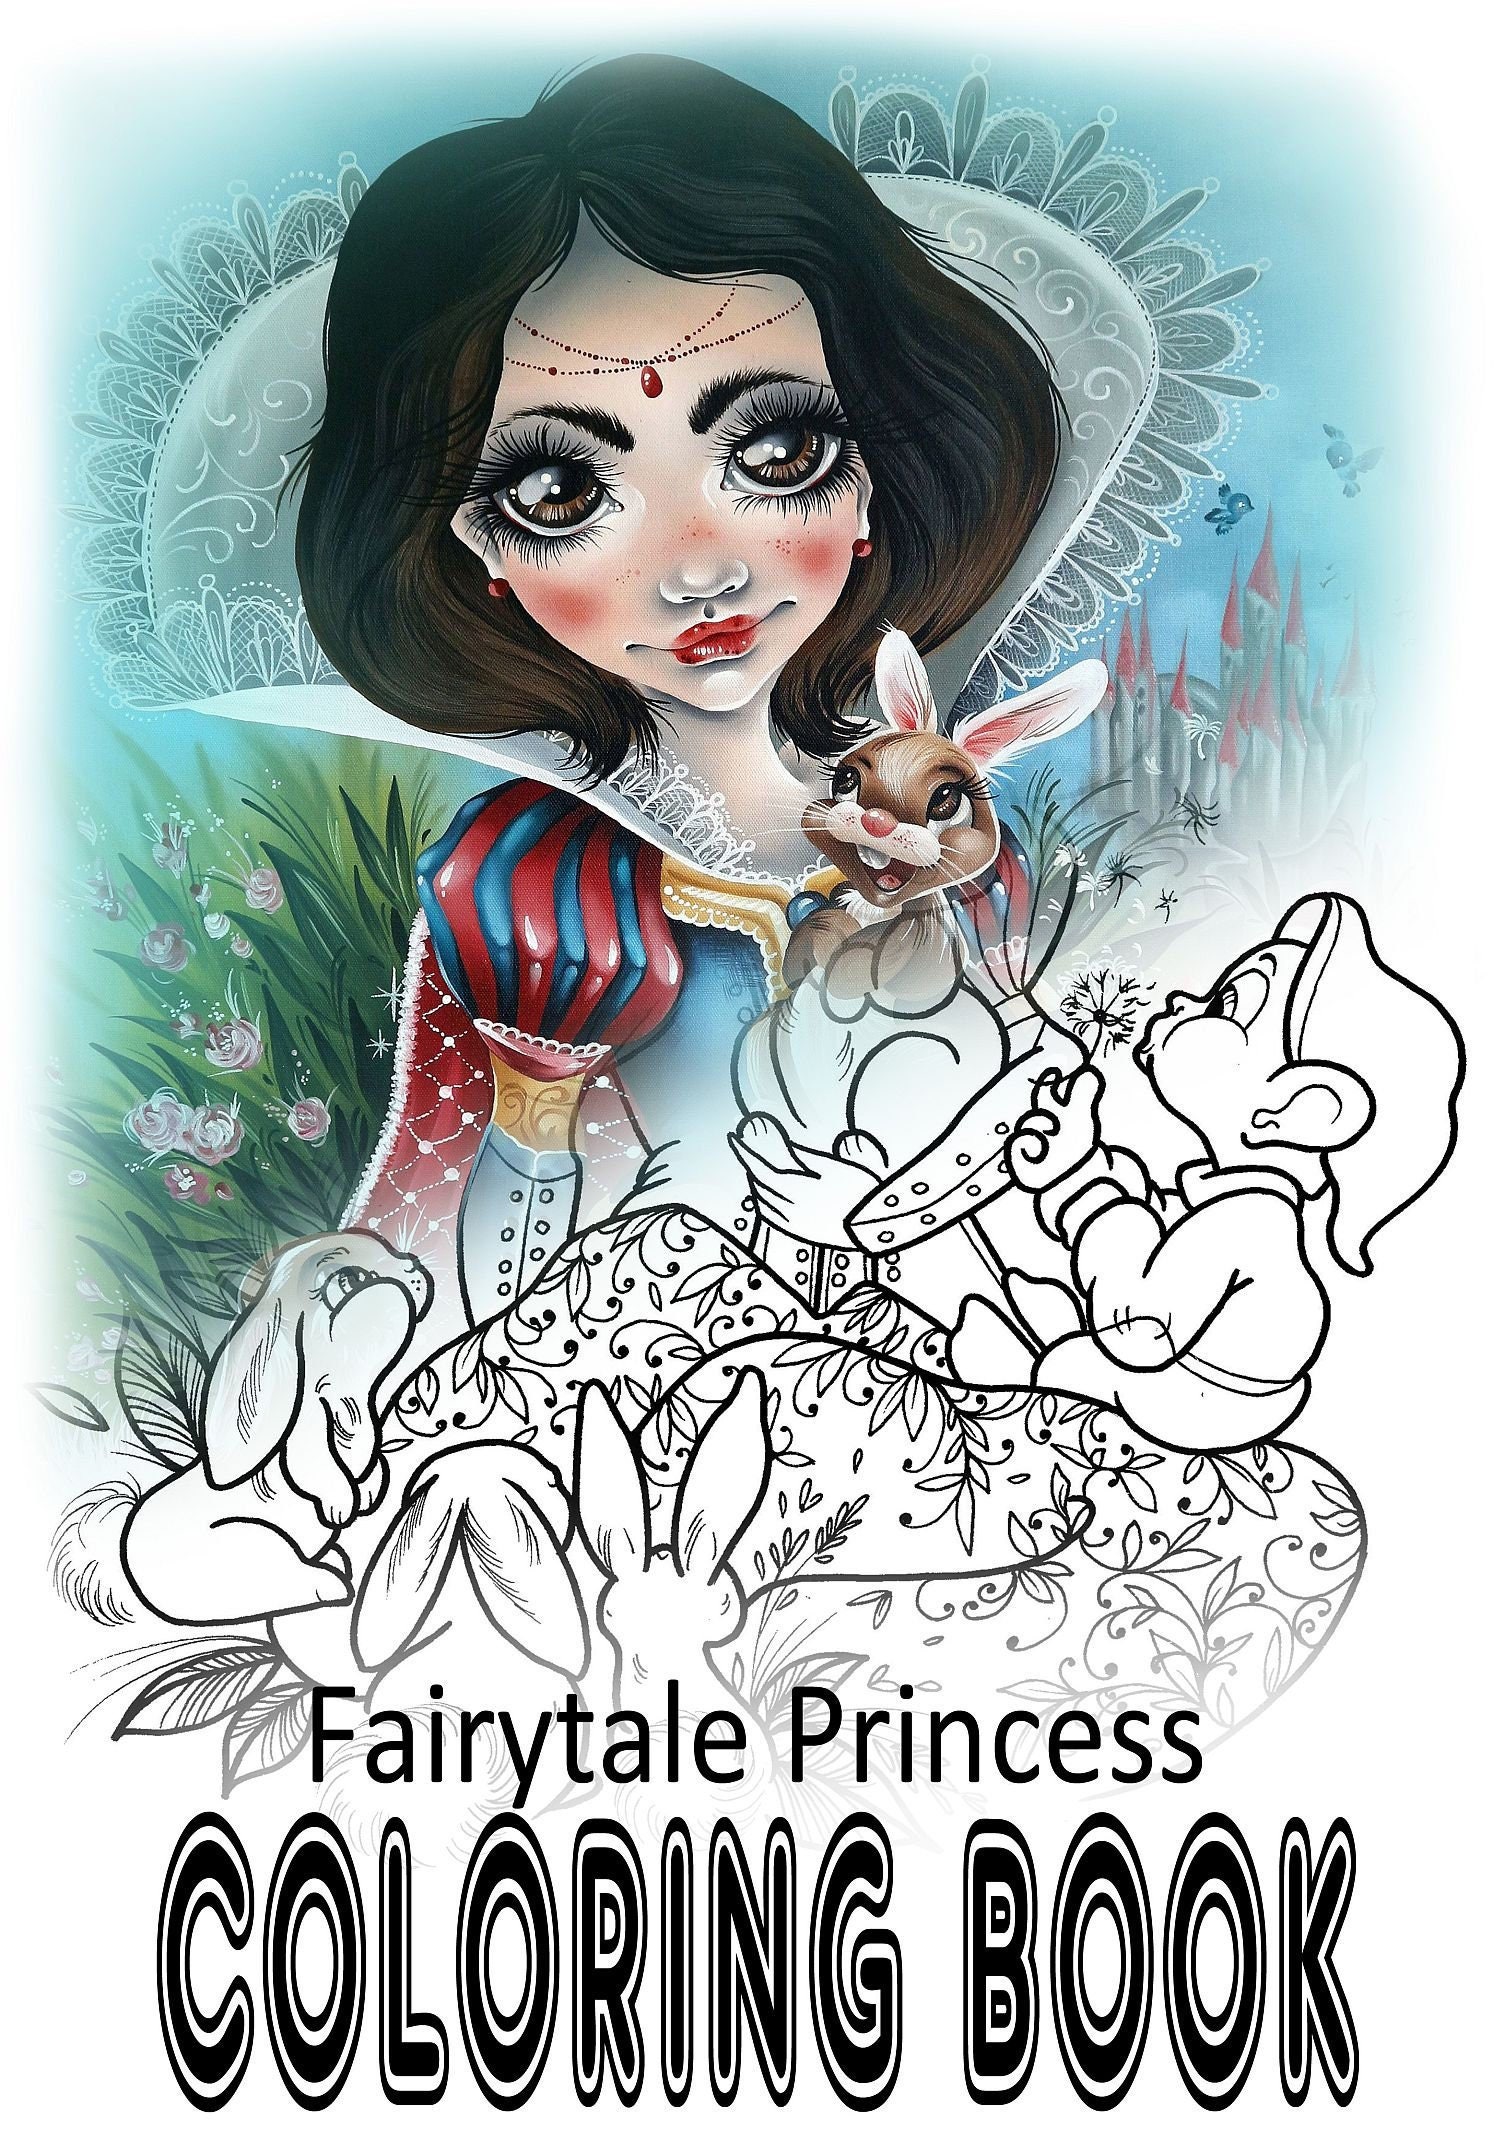 Fairytale Coloring Book: For Kids and Adult, Great Gift Coloring Book ( for Boys & Girls ) [Book]